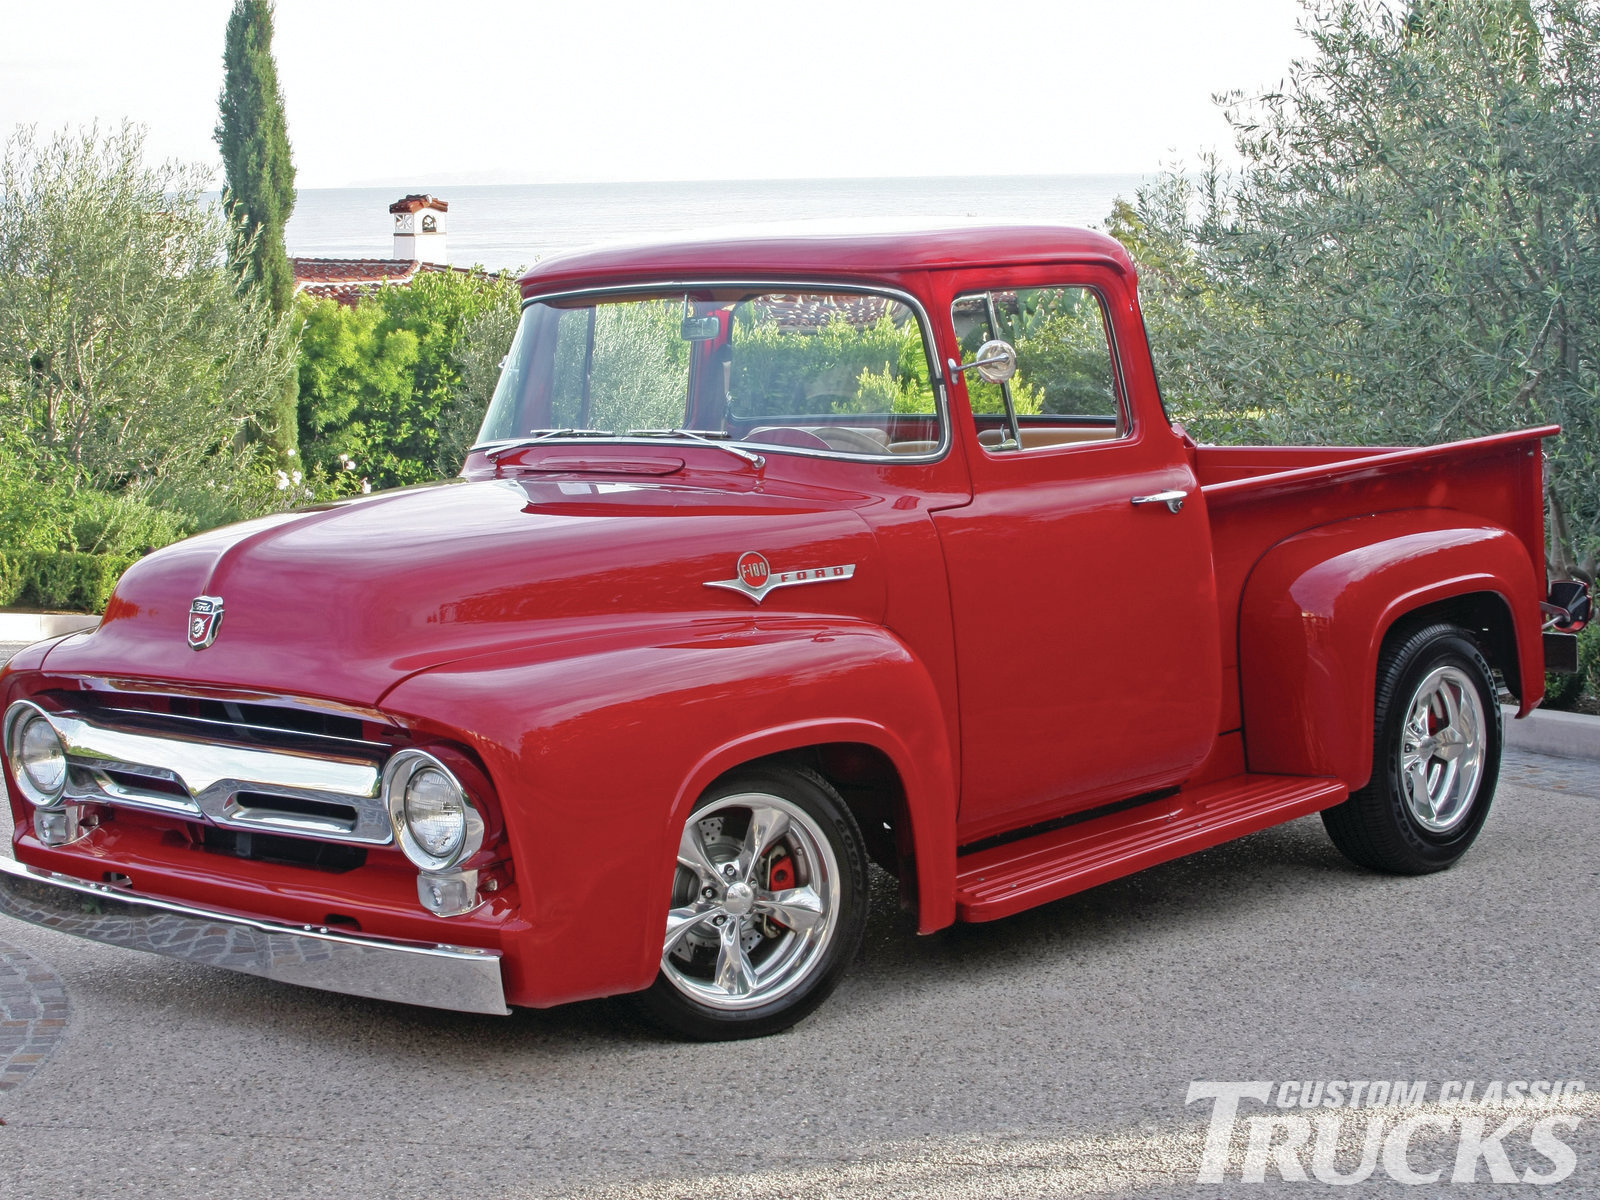 1104cct-02-1956-ford-f100-pickup-front.jpg